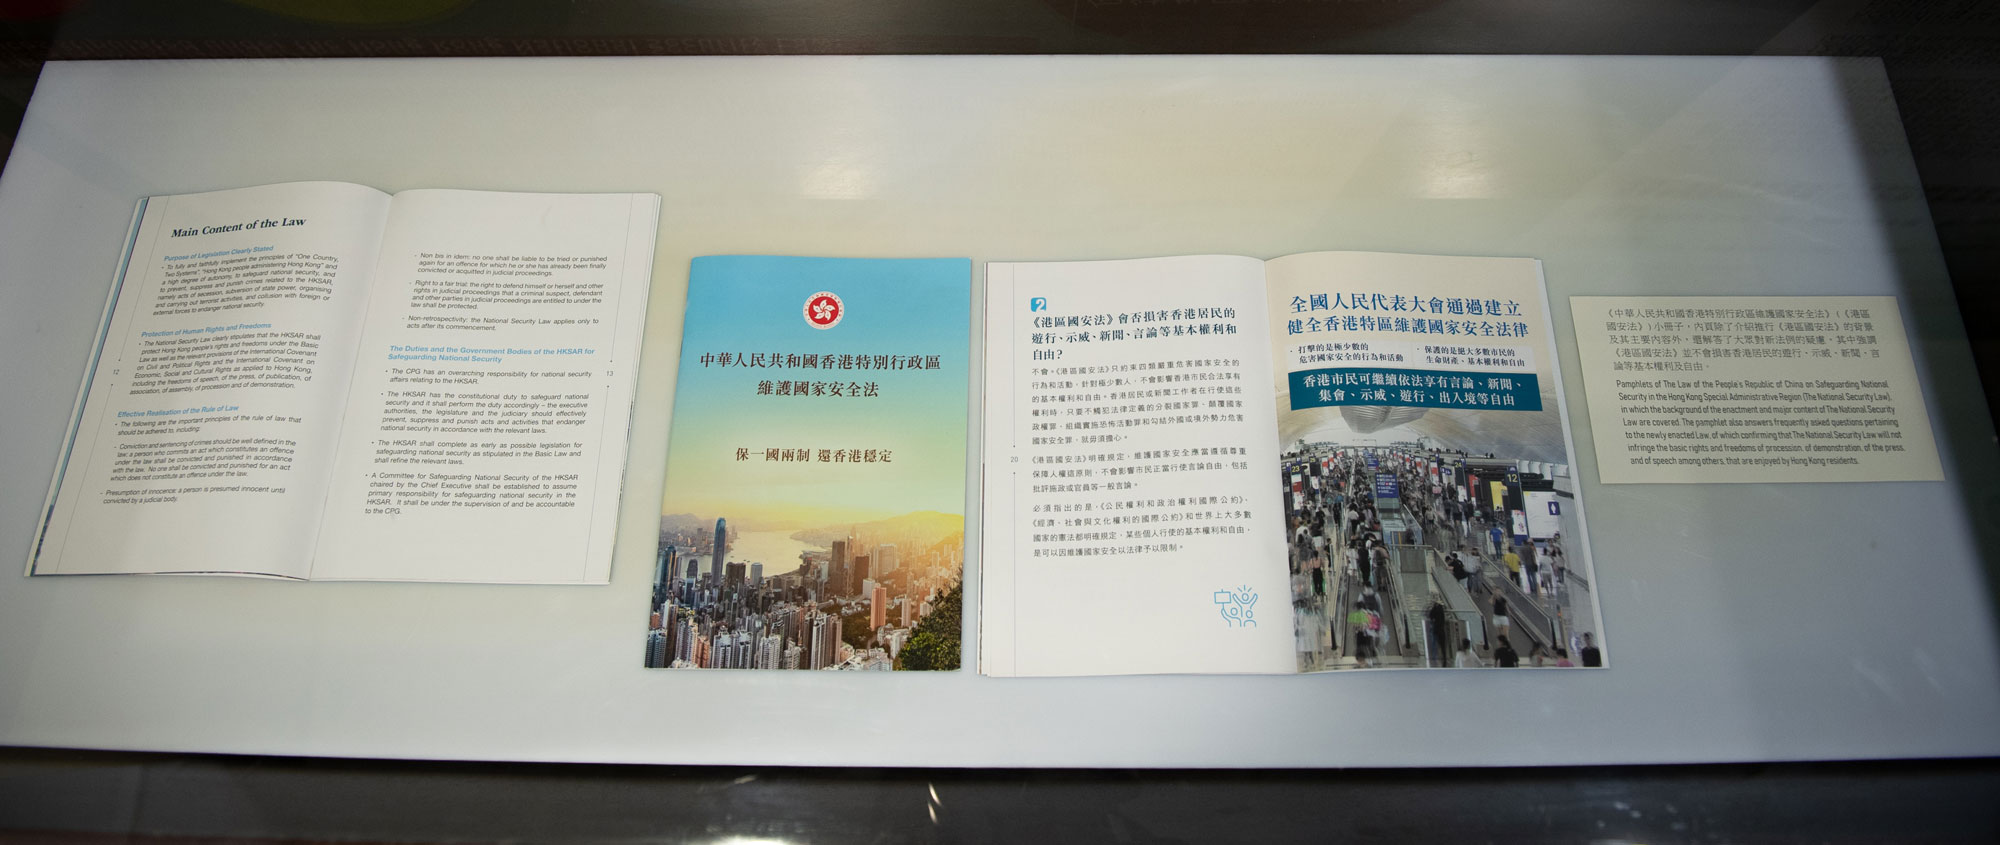 Pamphlets of The Law of the People's Republic of China on Safeguarding National Security in the Hong Kong Special Administrative Region.